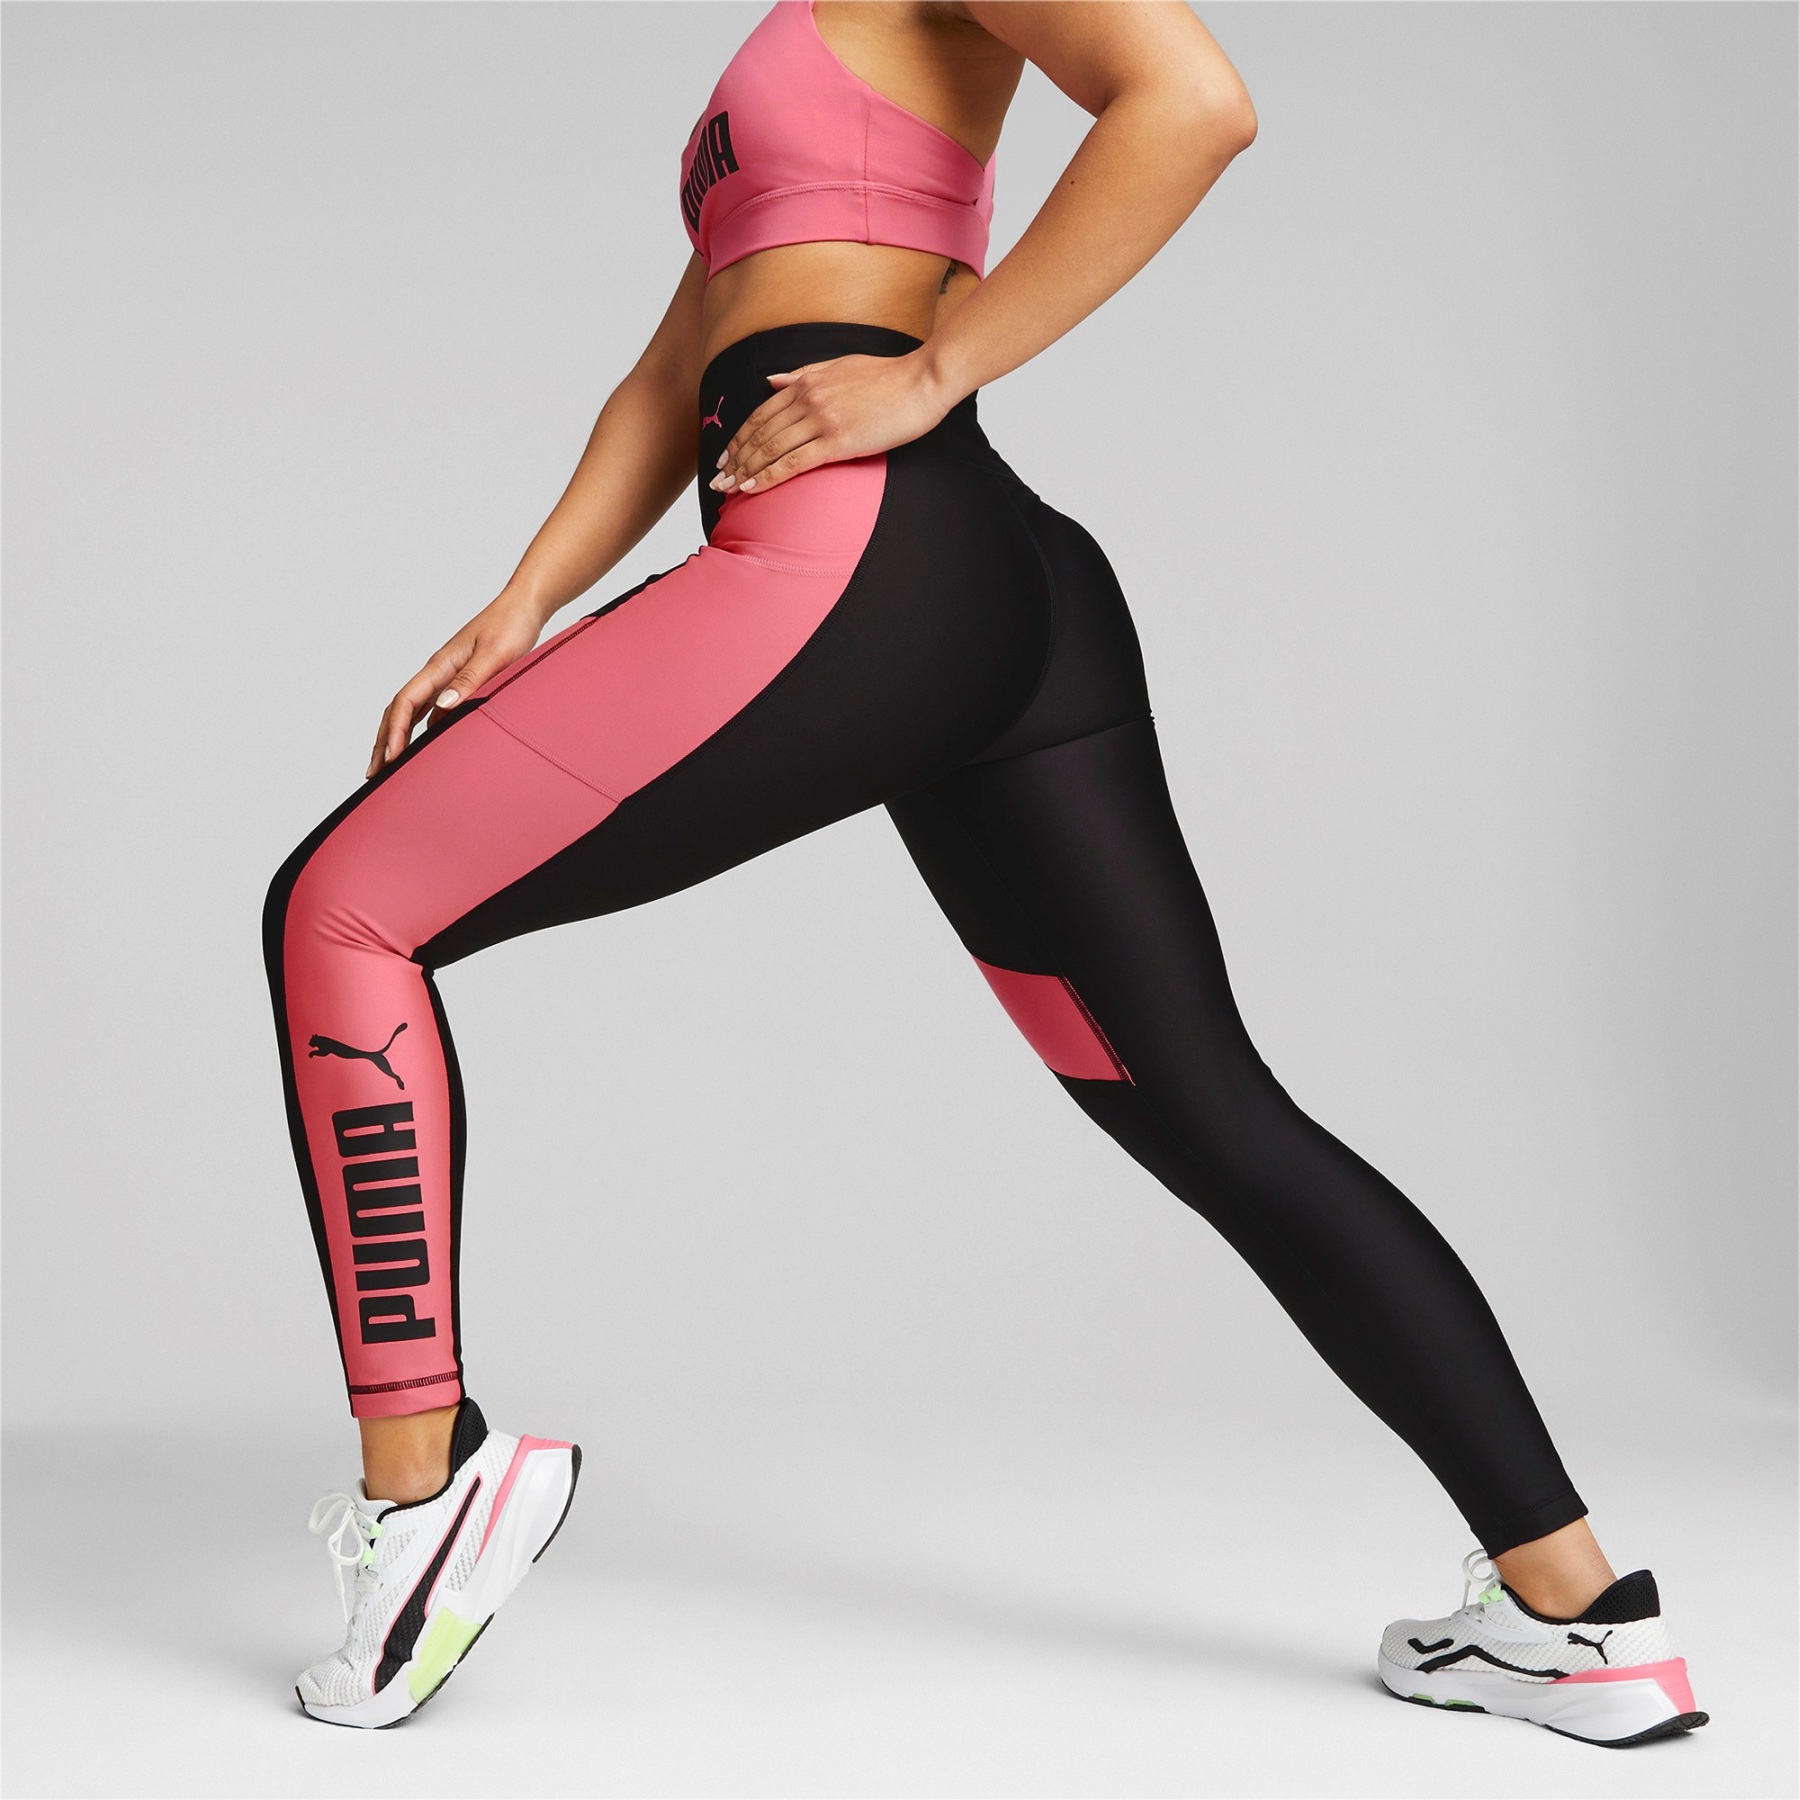 Puma Evide high waisted leggings in pink